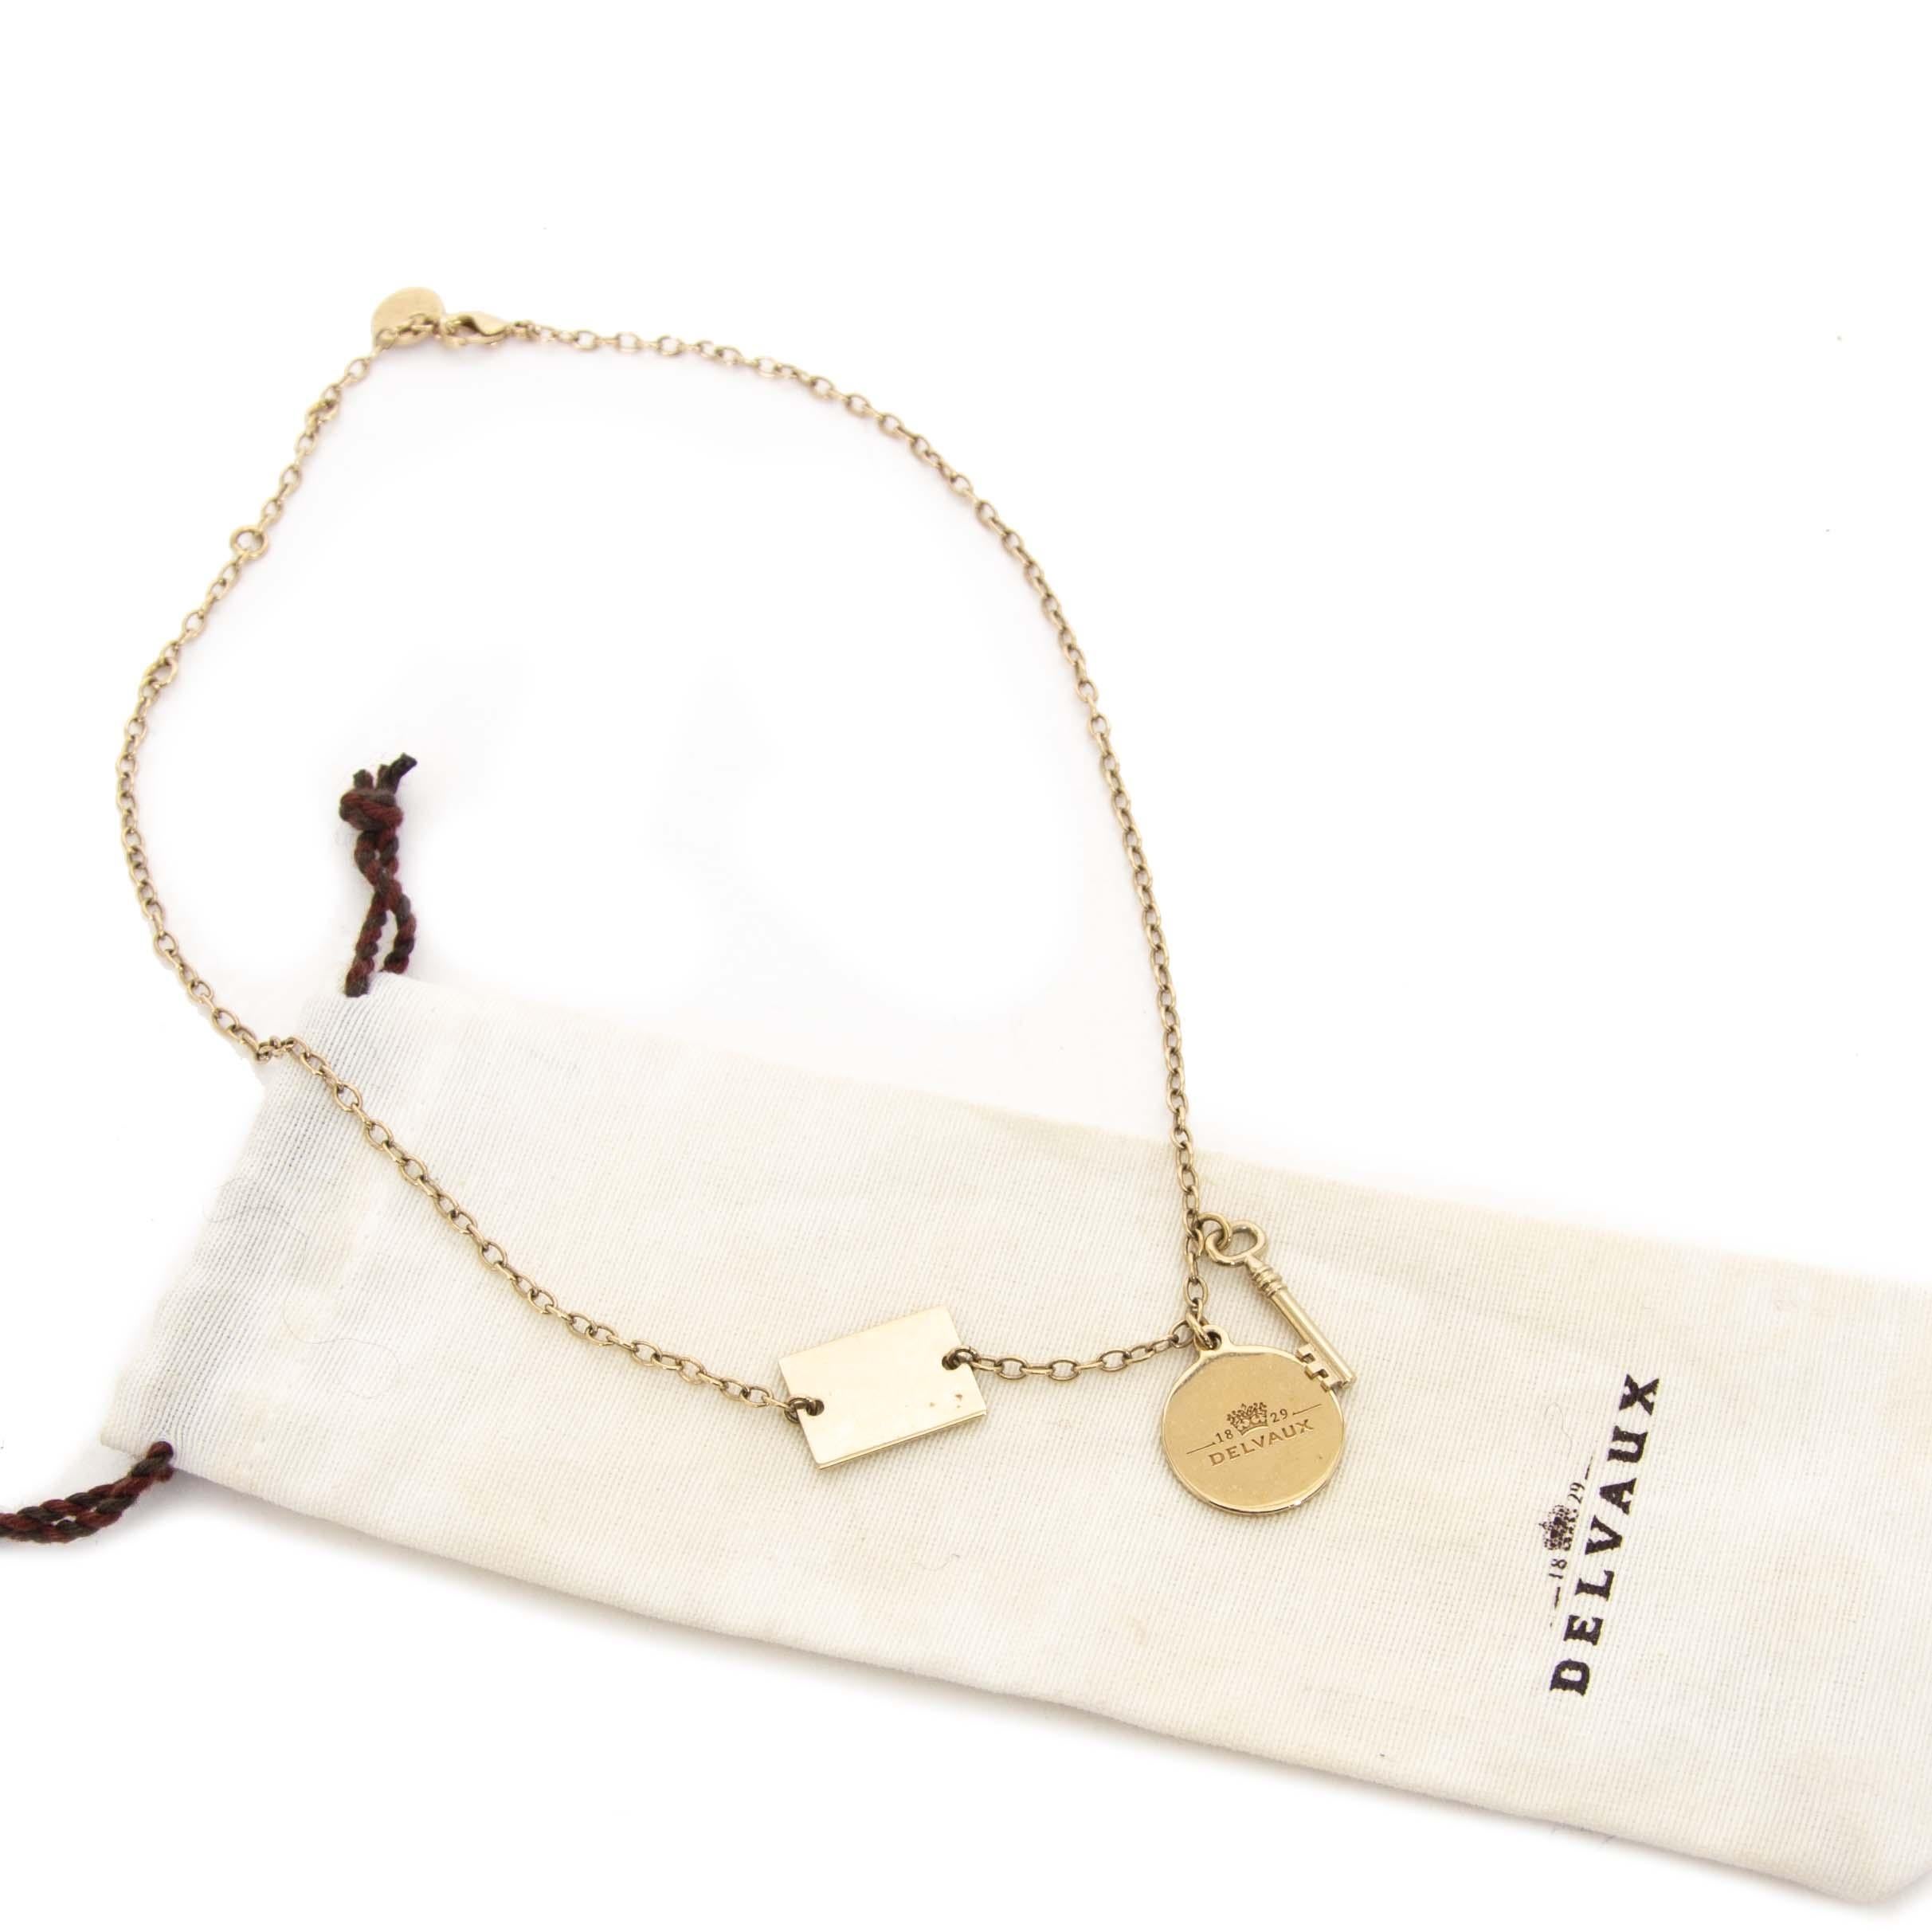 Good condition

Delvaux Charm Necklace

This dainty gold-toned charm necklace is just precious! It features three different charms: an envelope, a key and a round hanger with a crown and the letters Delvaux printed on it. This Delvaux Charm Necklace